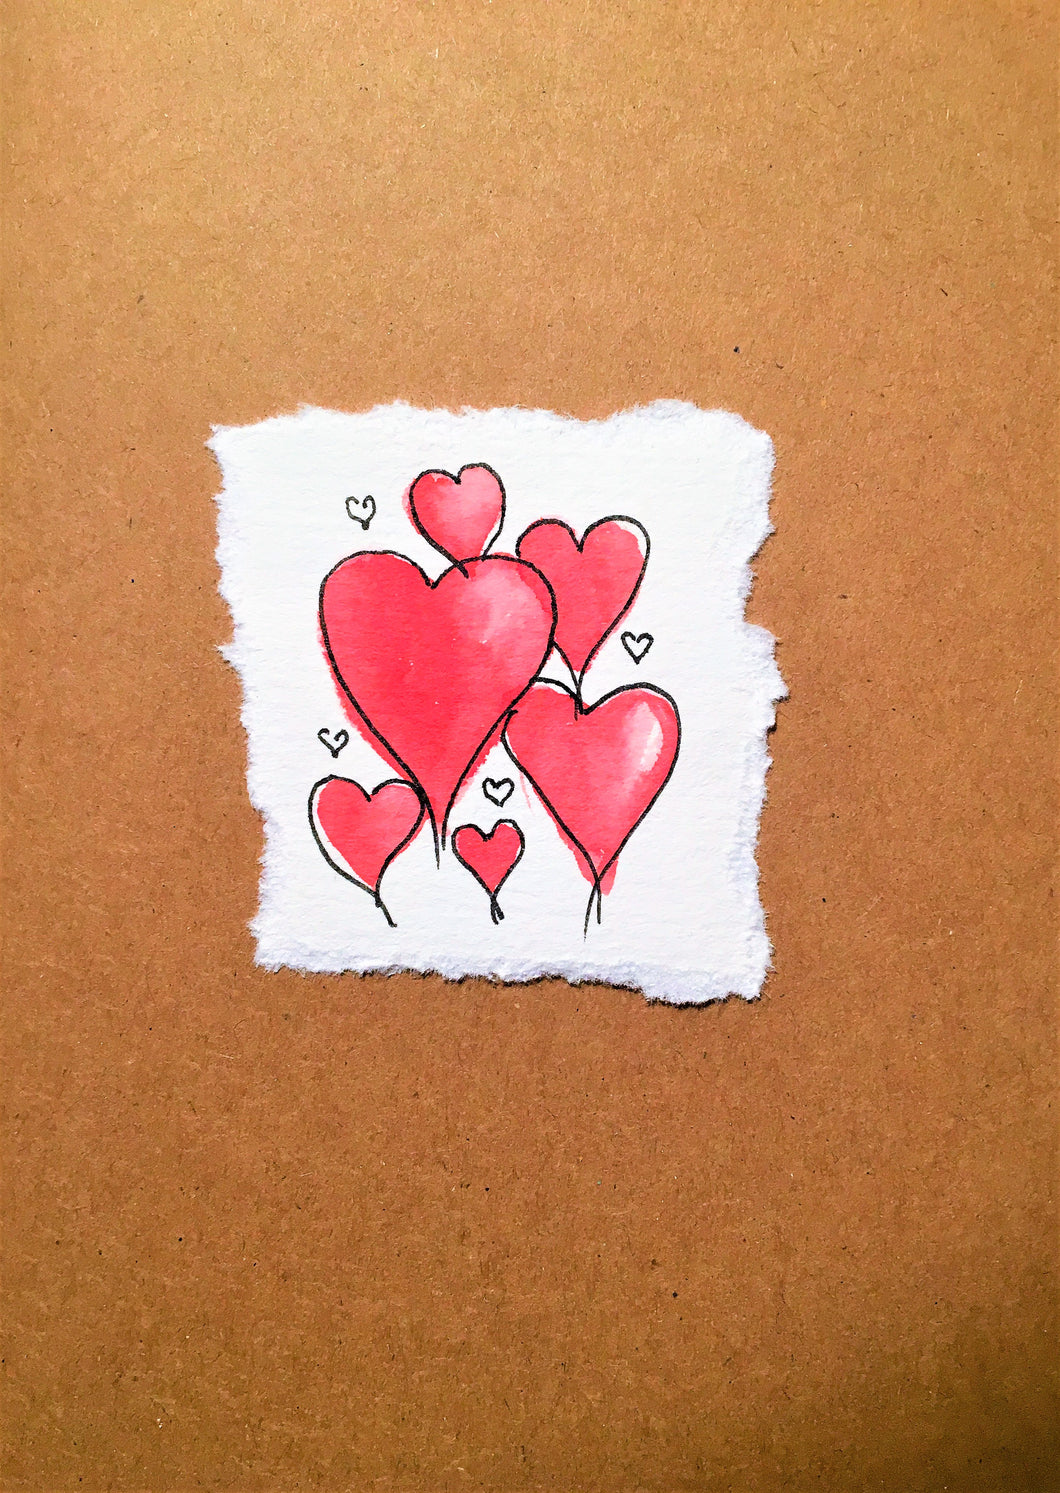 Valentines Card Hearts in the middle - Handmade - eDgE dEsiGn London